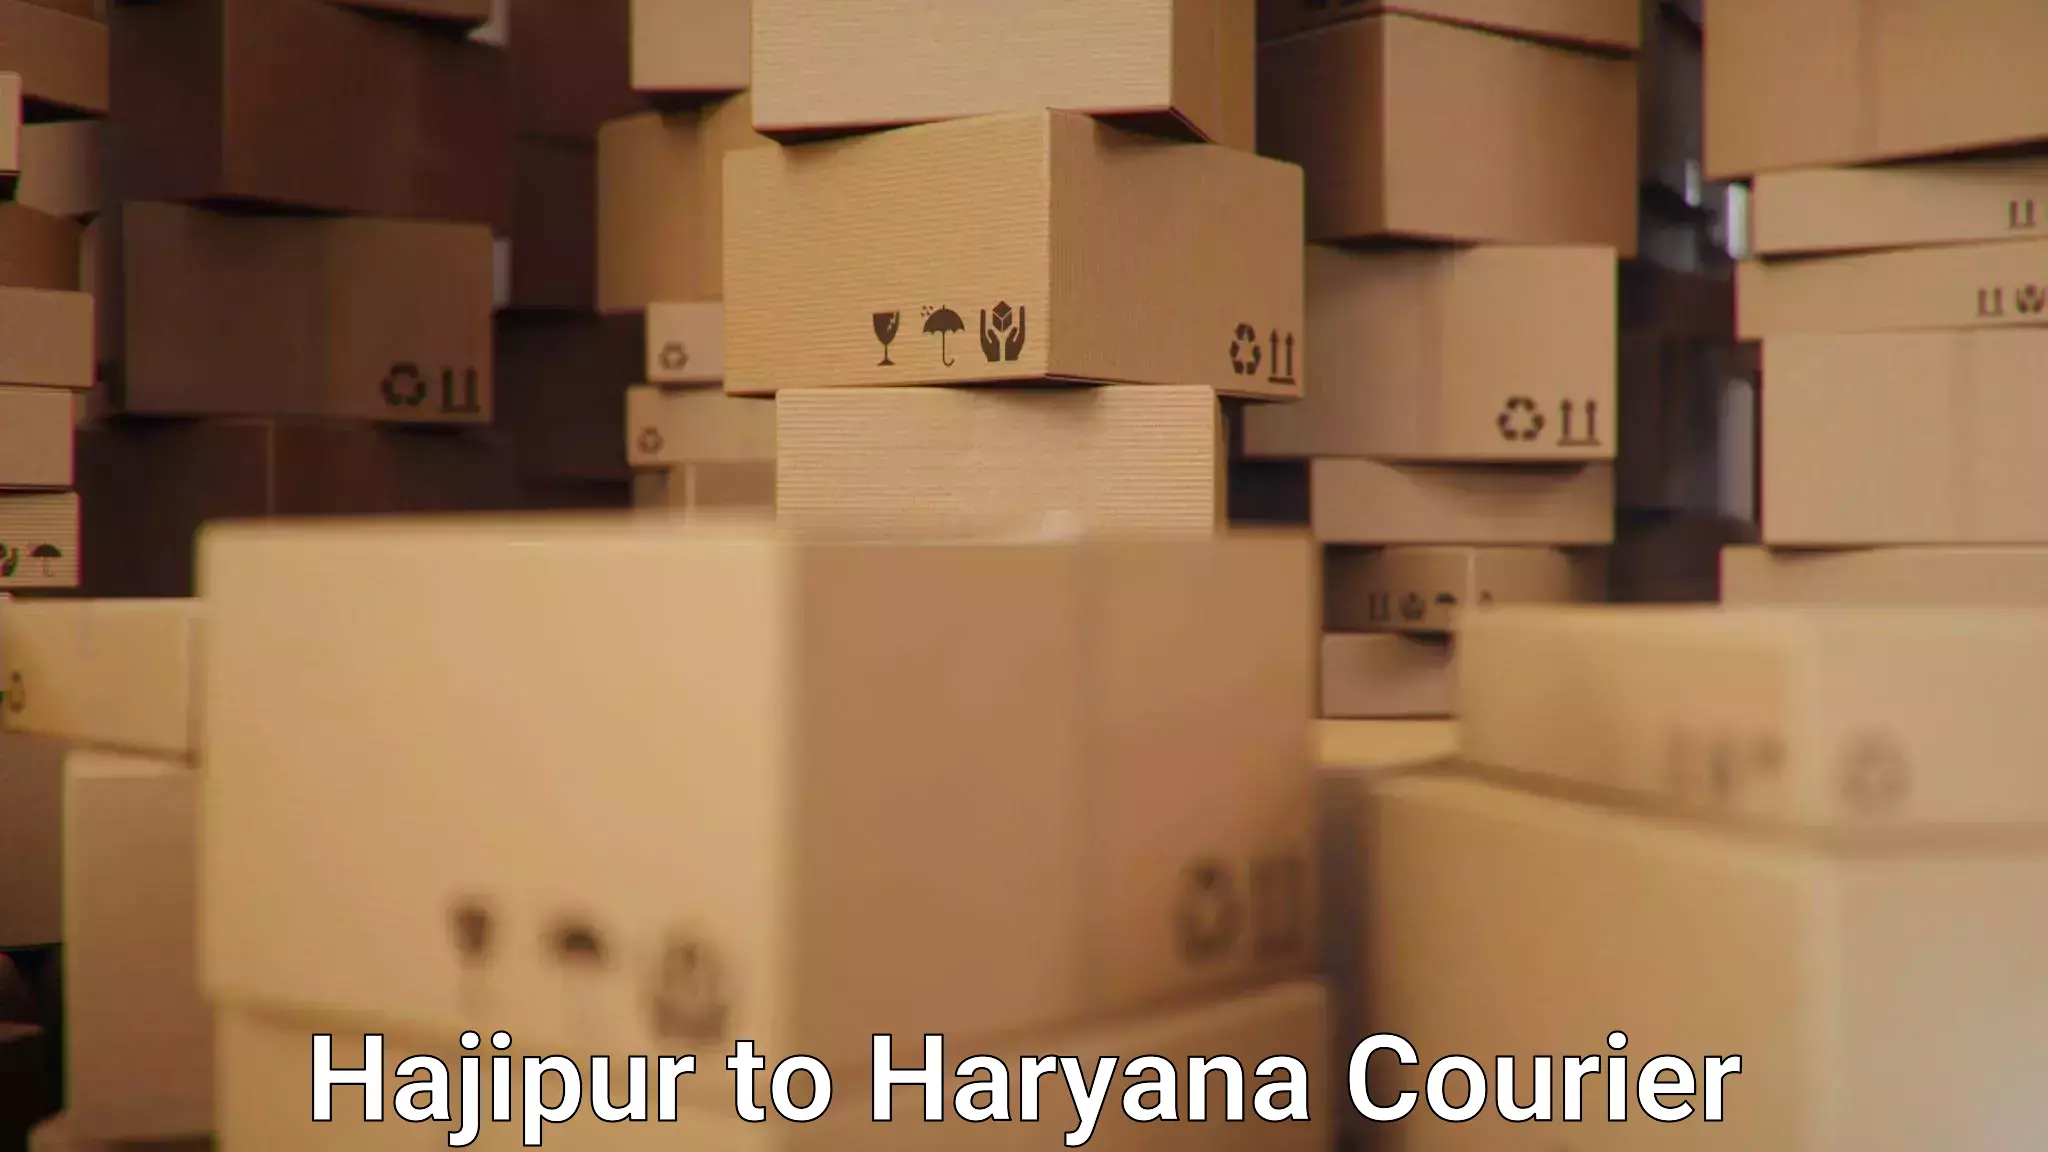 Courier service efficiency Hajipur to Sirsa